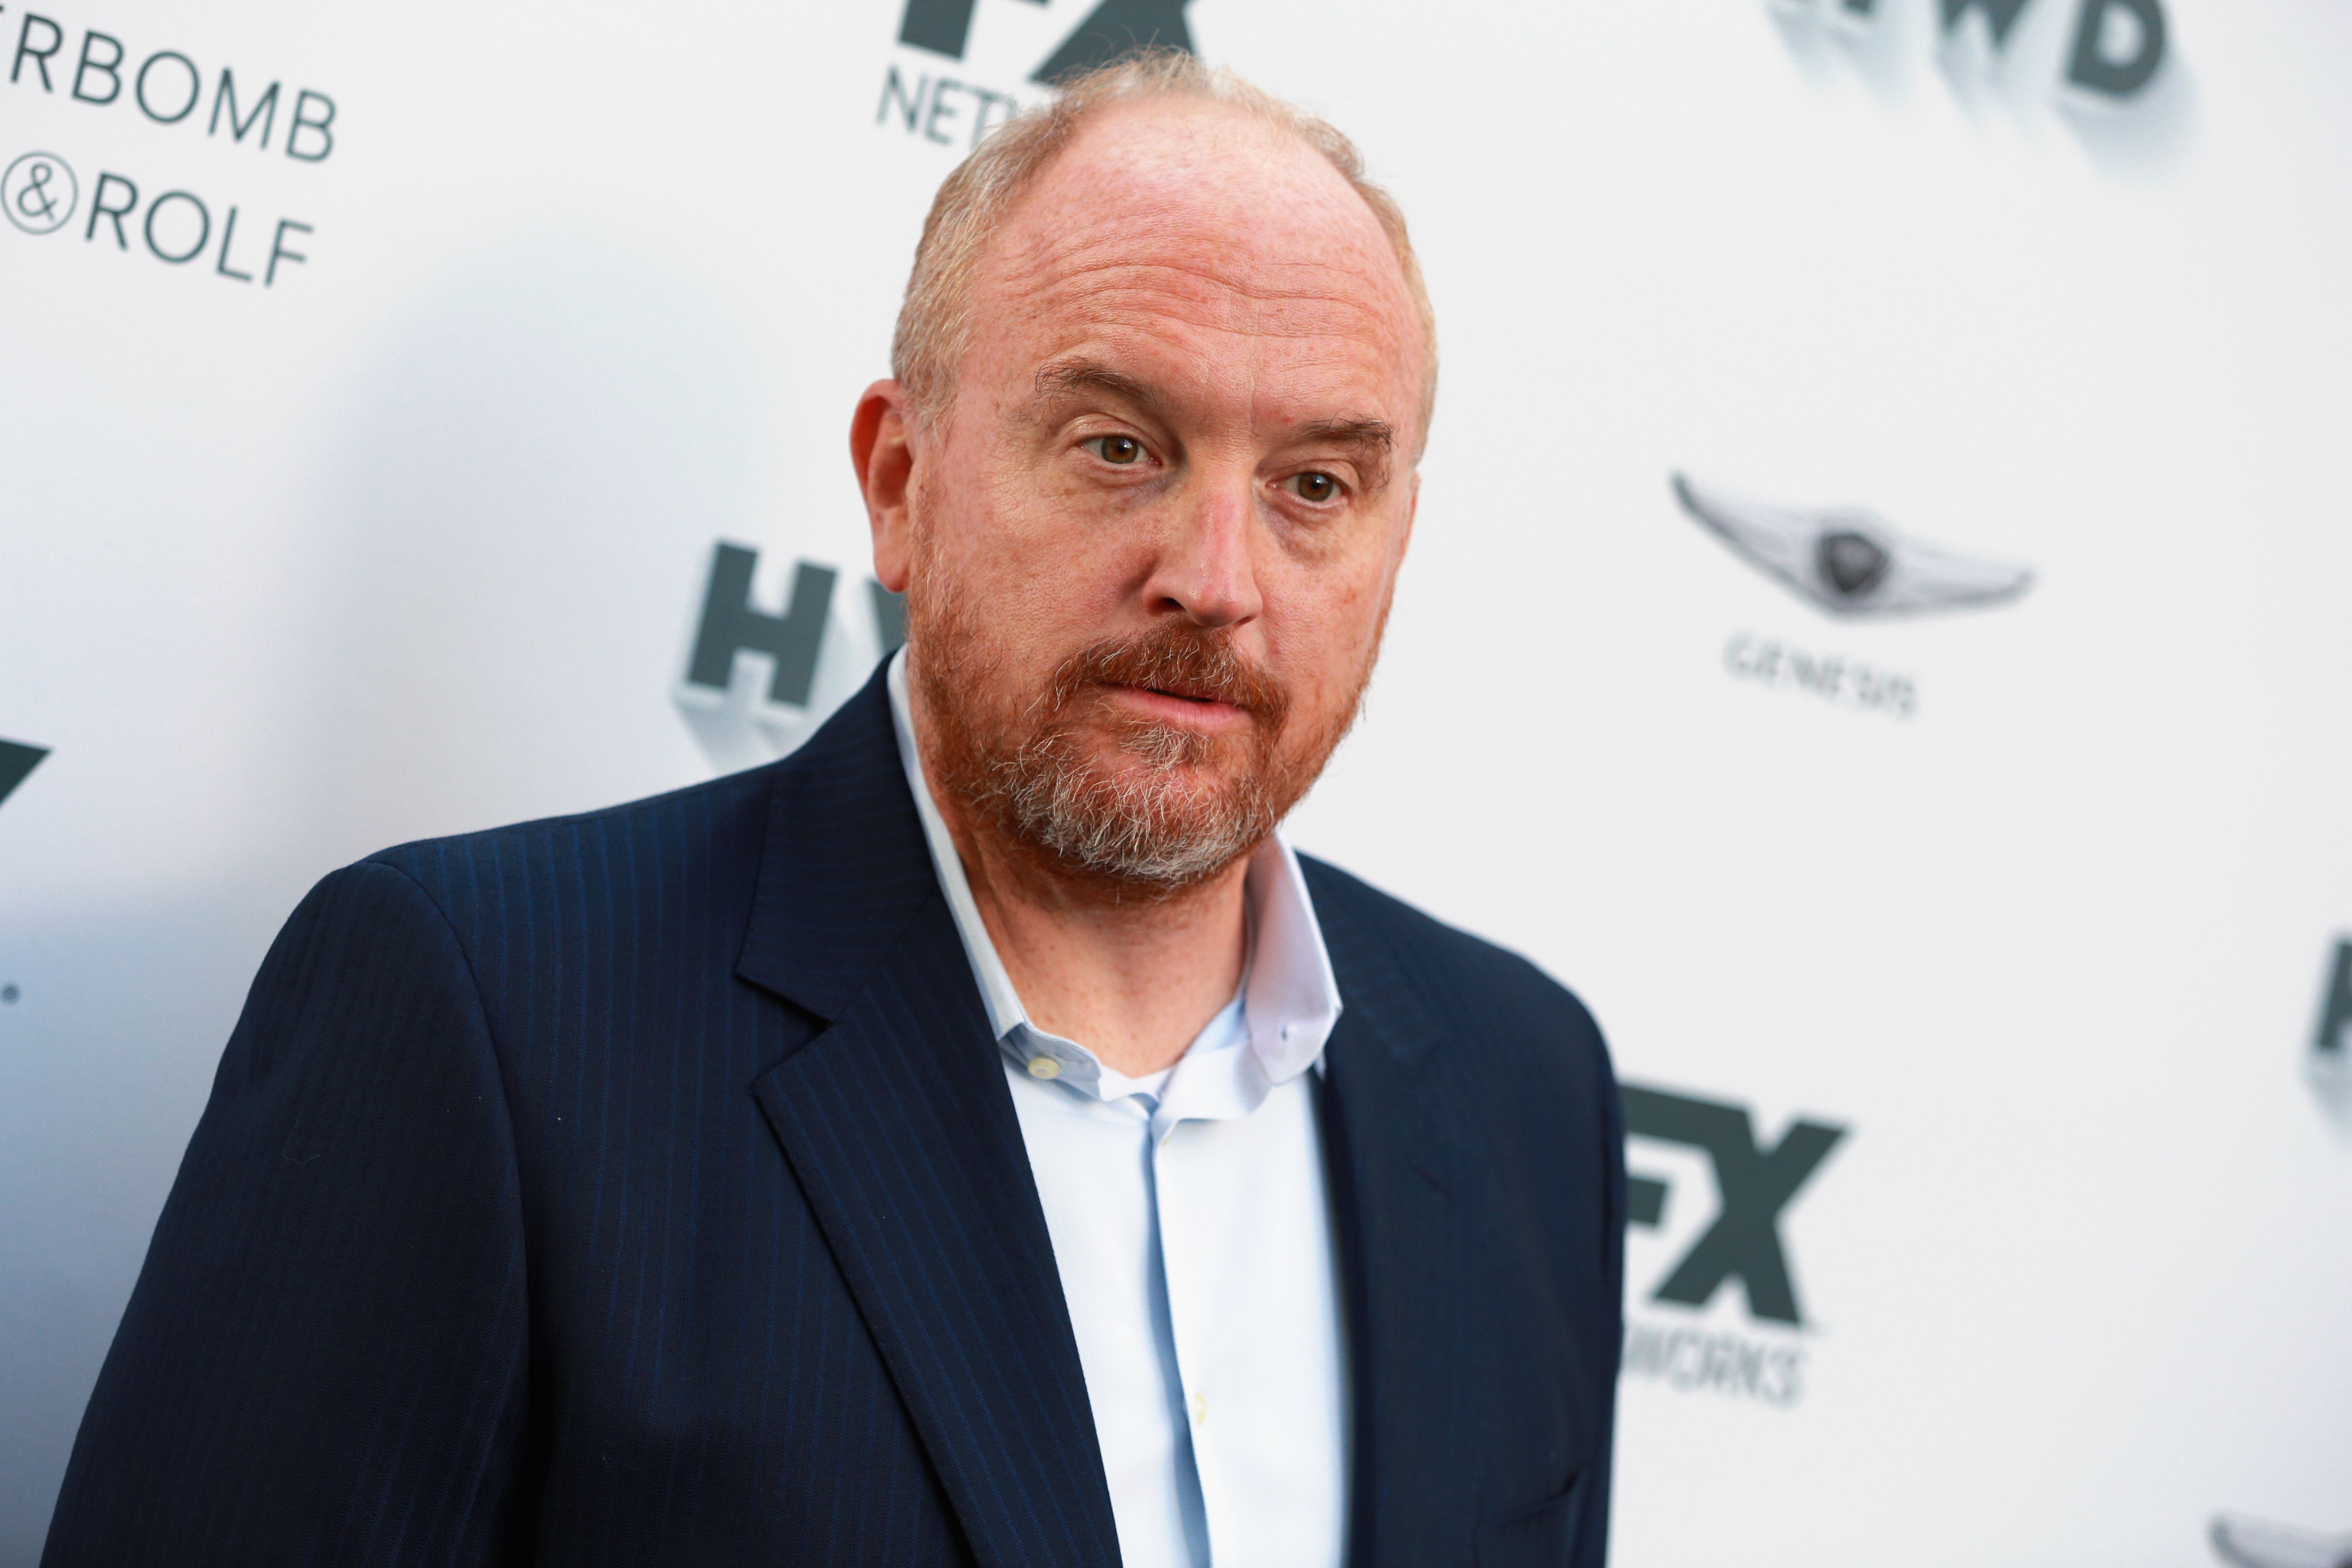 Louis C.K. just released his first new stand-up special in years